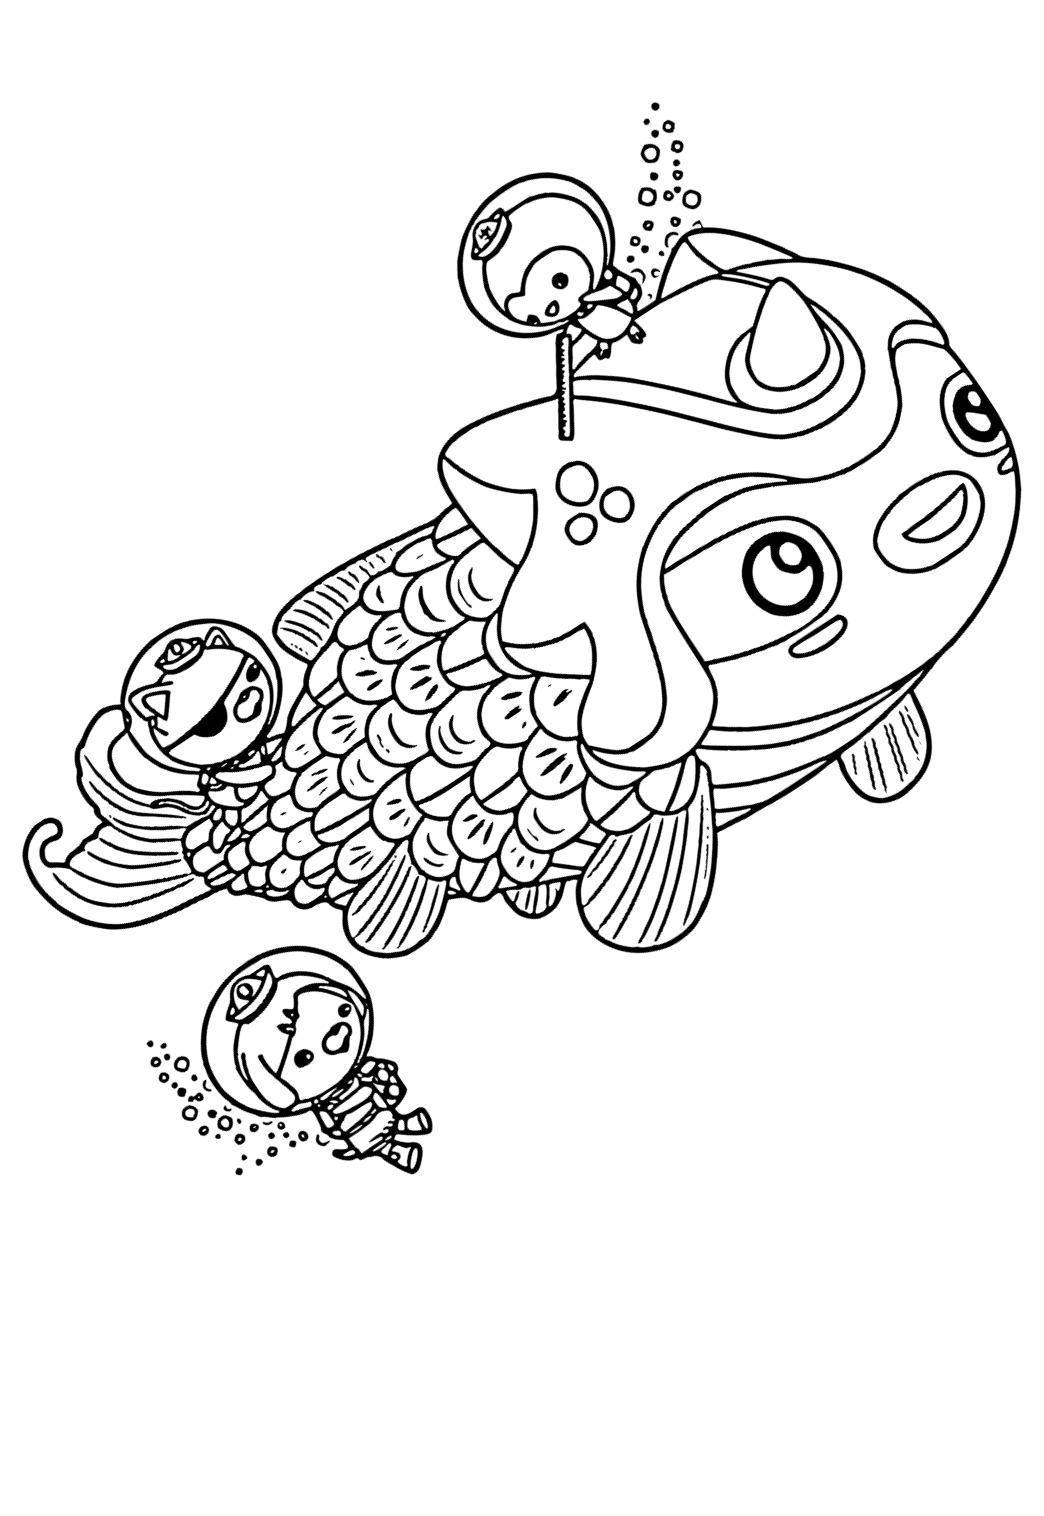 Free printable octonauts fish coloring page for adults and kids